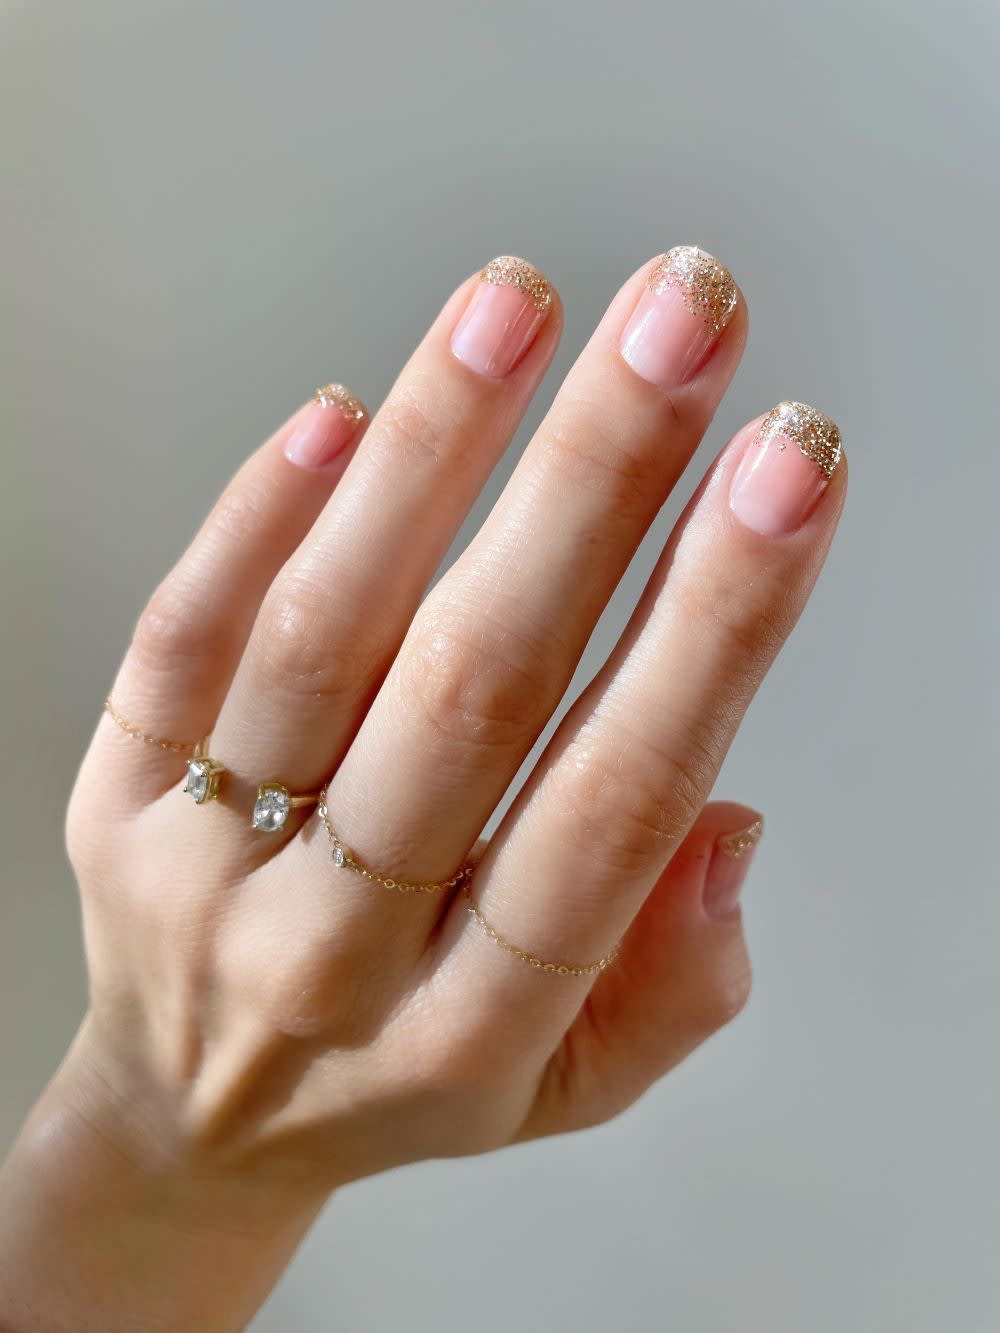 Glitter Polish 101 – Tips for Application, Removal, and Everything Between!  | KBShimmer Blog